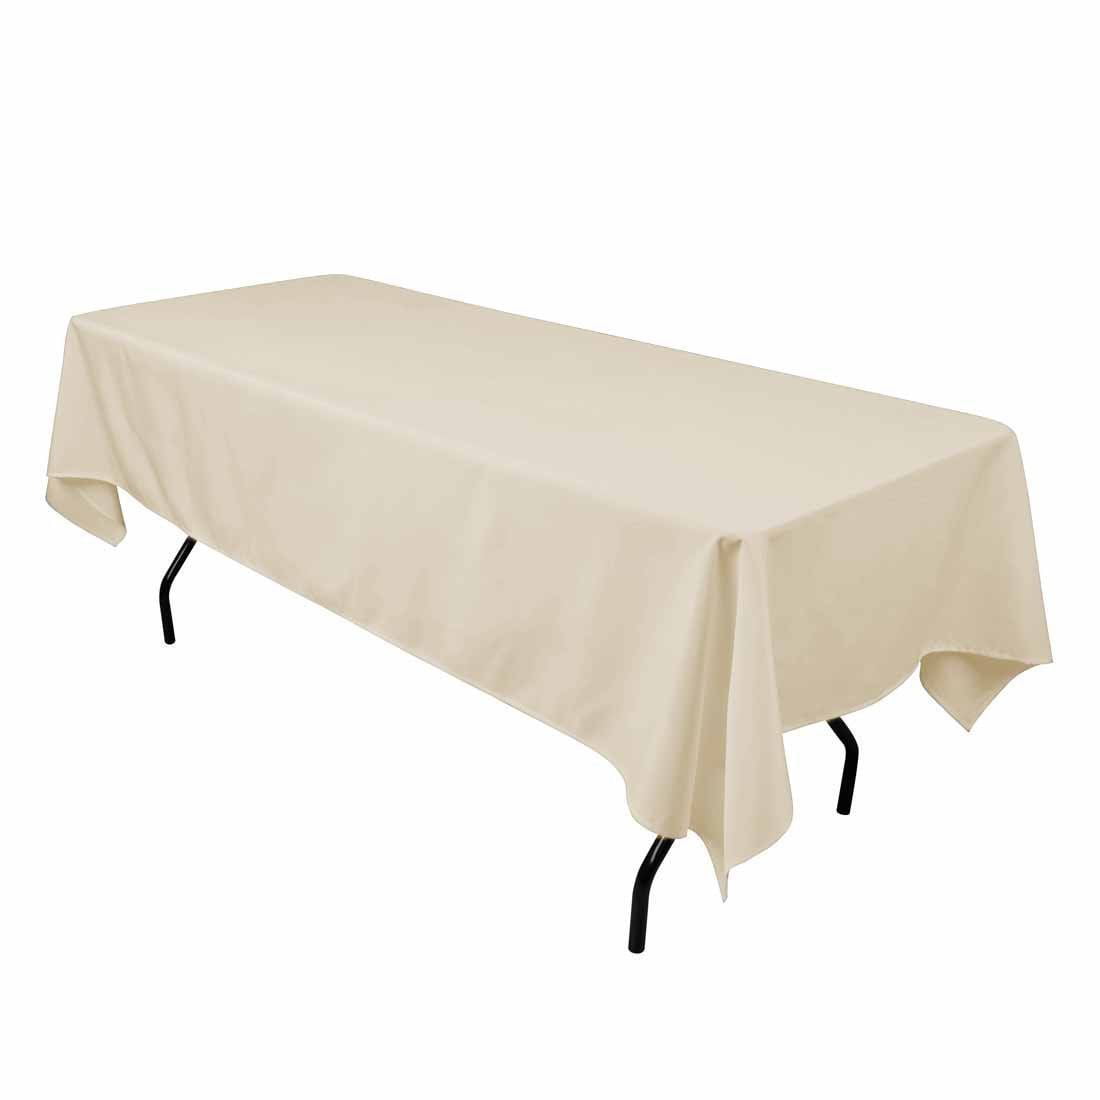 Tablecloths 60"x60" Square Seamless Polyester Restaurant Catering Wedding Party 